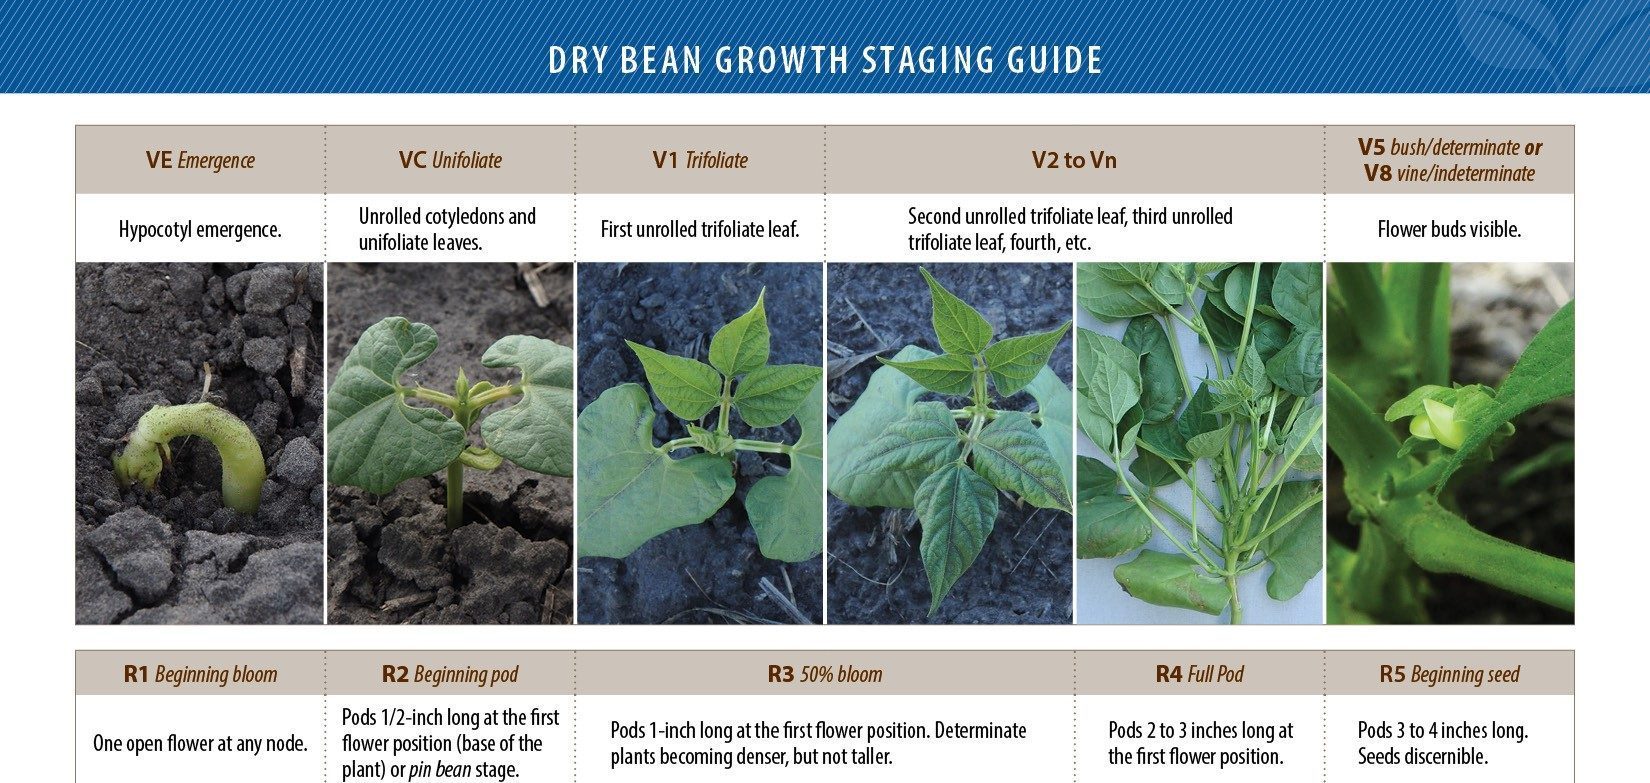 Dry Bean Growth Staging Guide